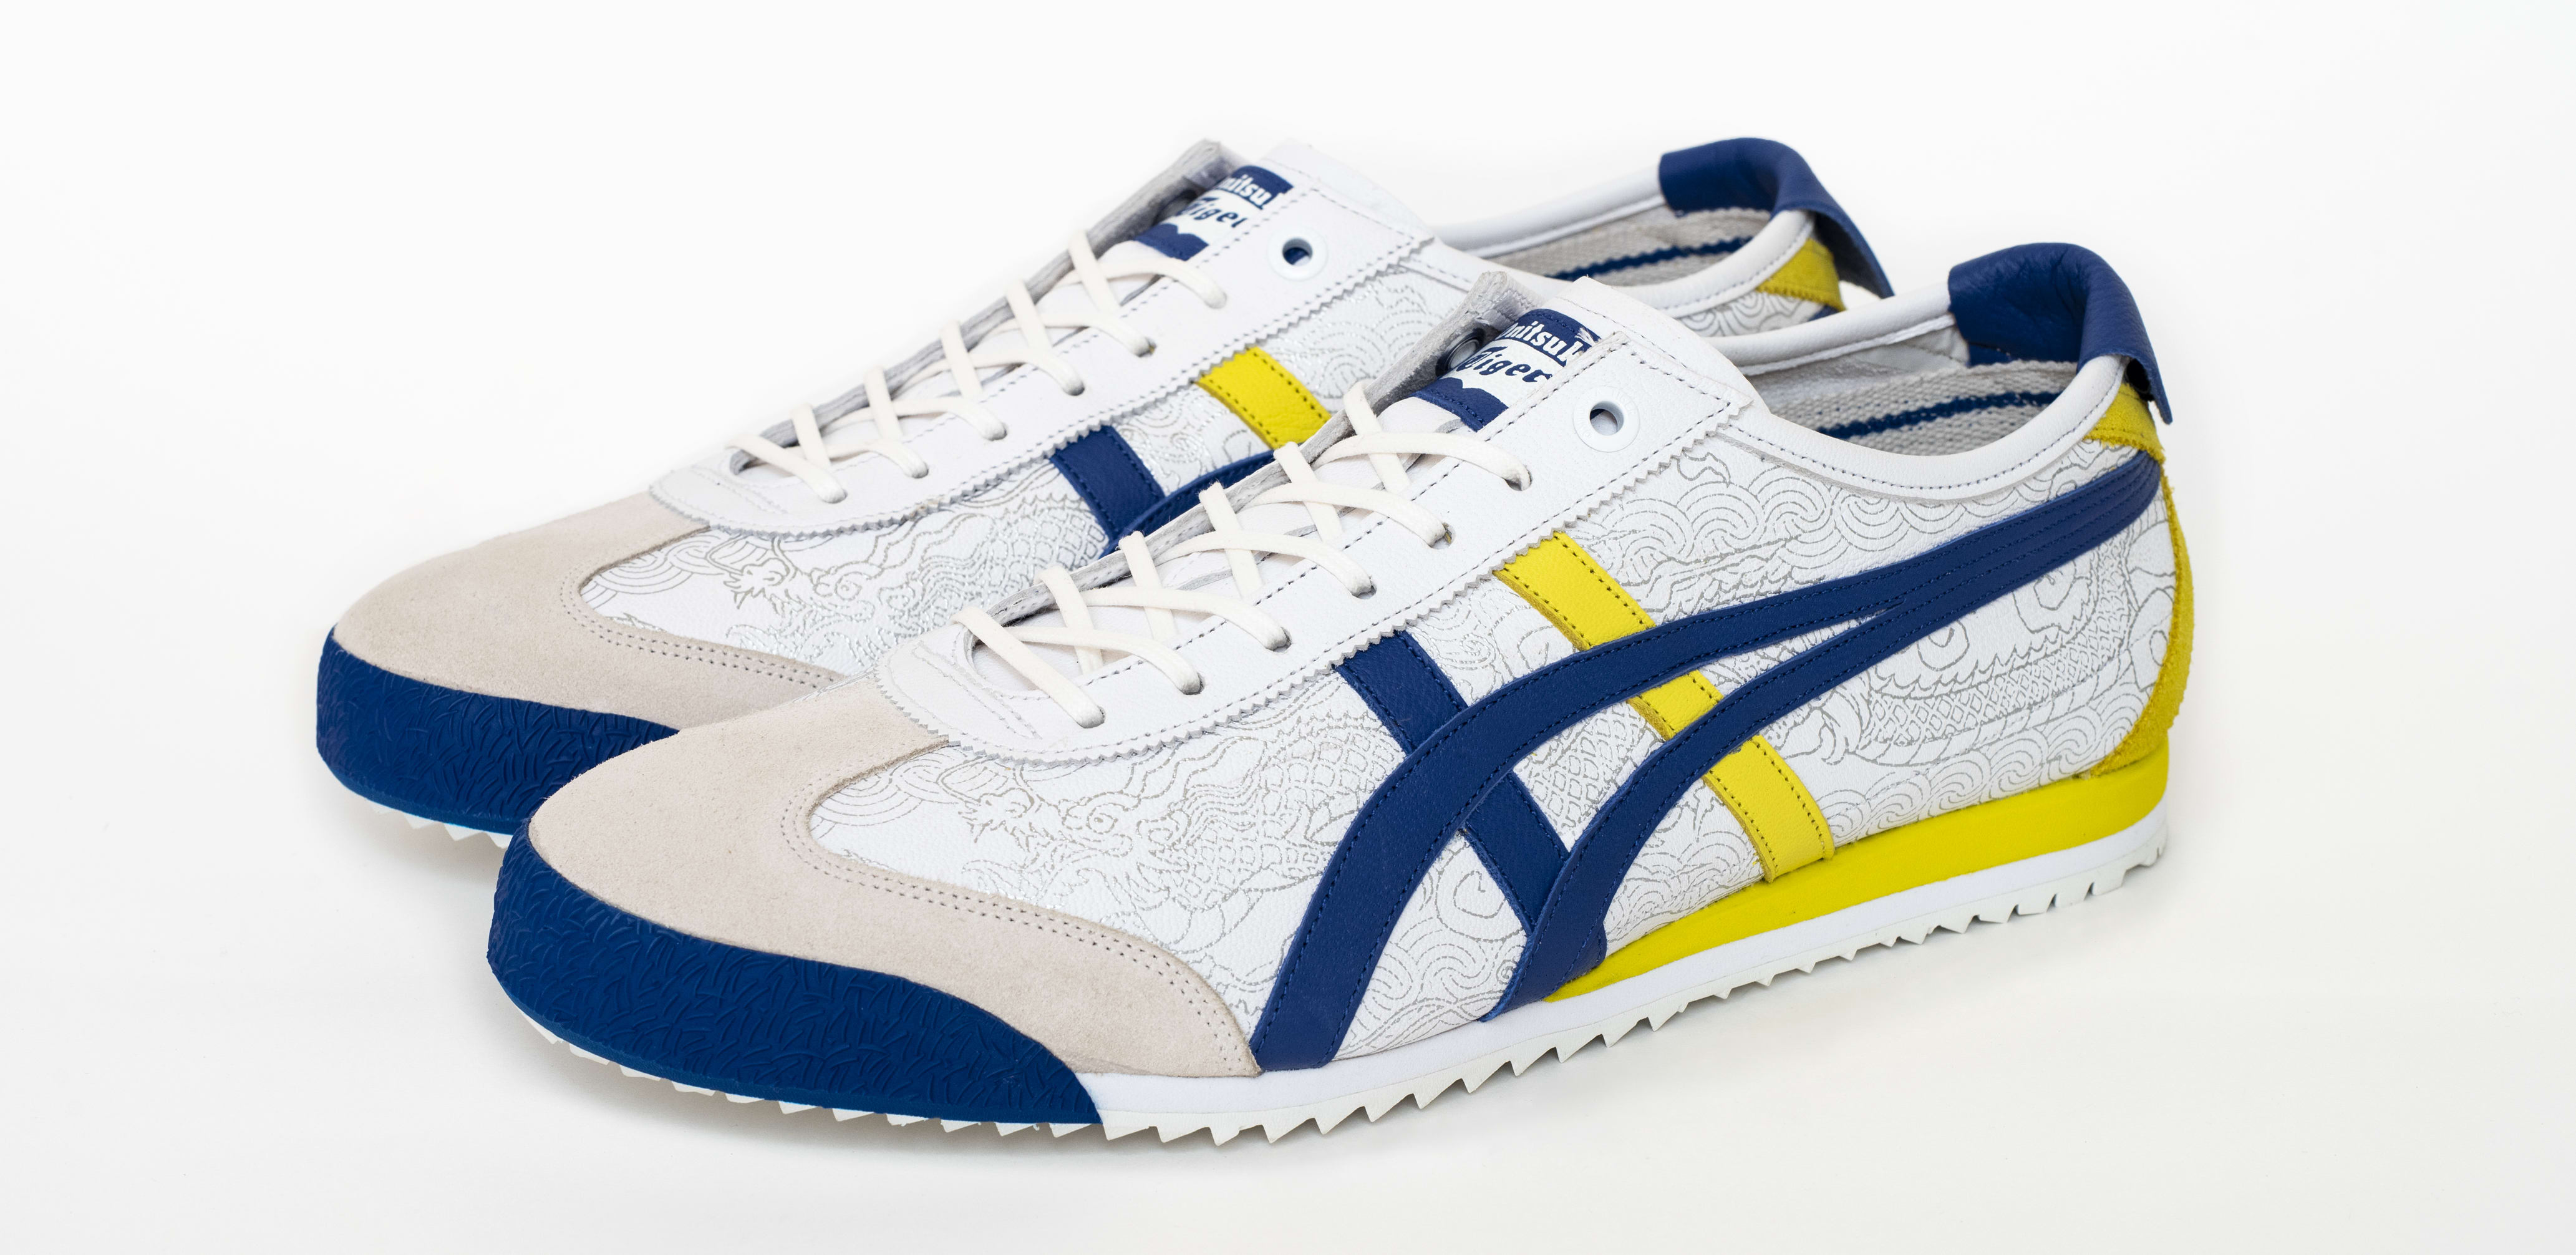 onitsuka tiger official website cheap 